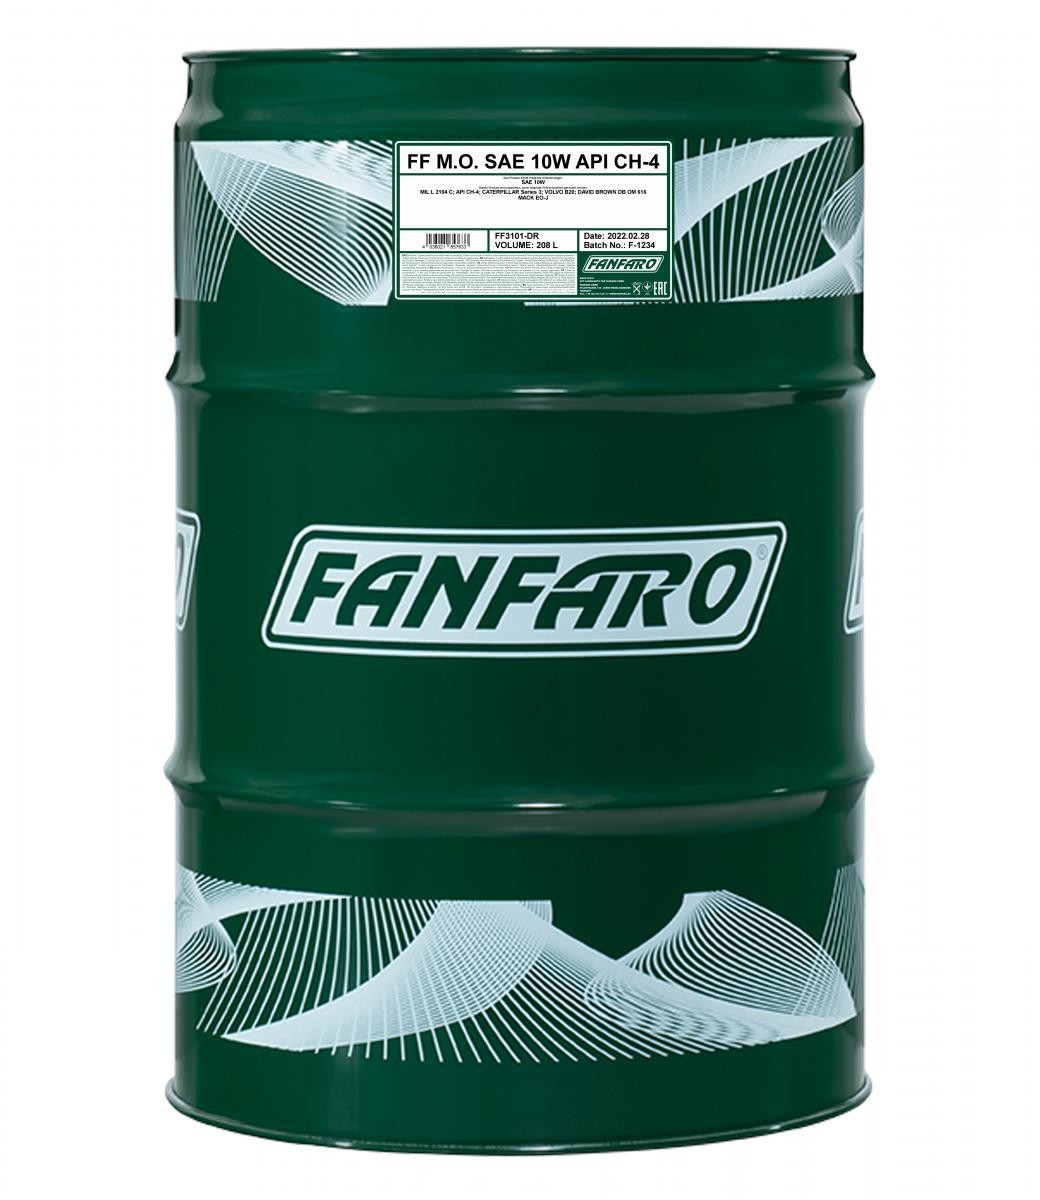 FANFARO M.O., SAE 10W FF3101-DR Engine oil 10W, 208l, Part Synthetic Oil